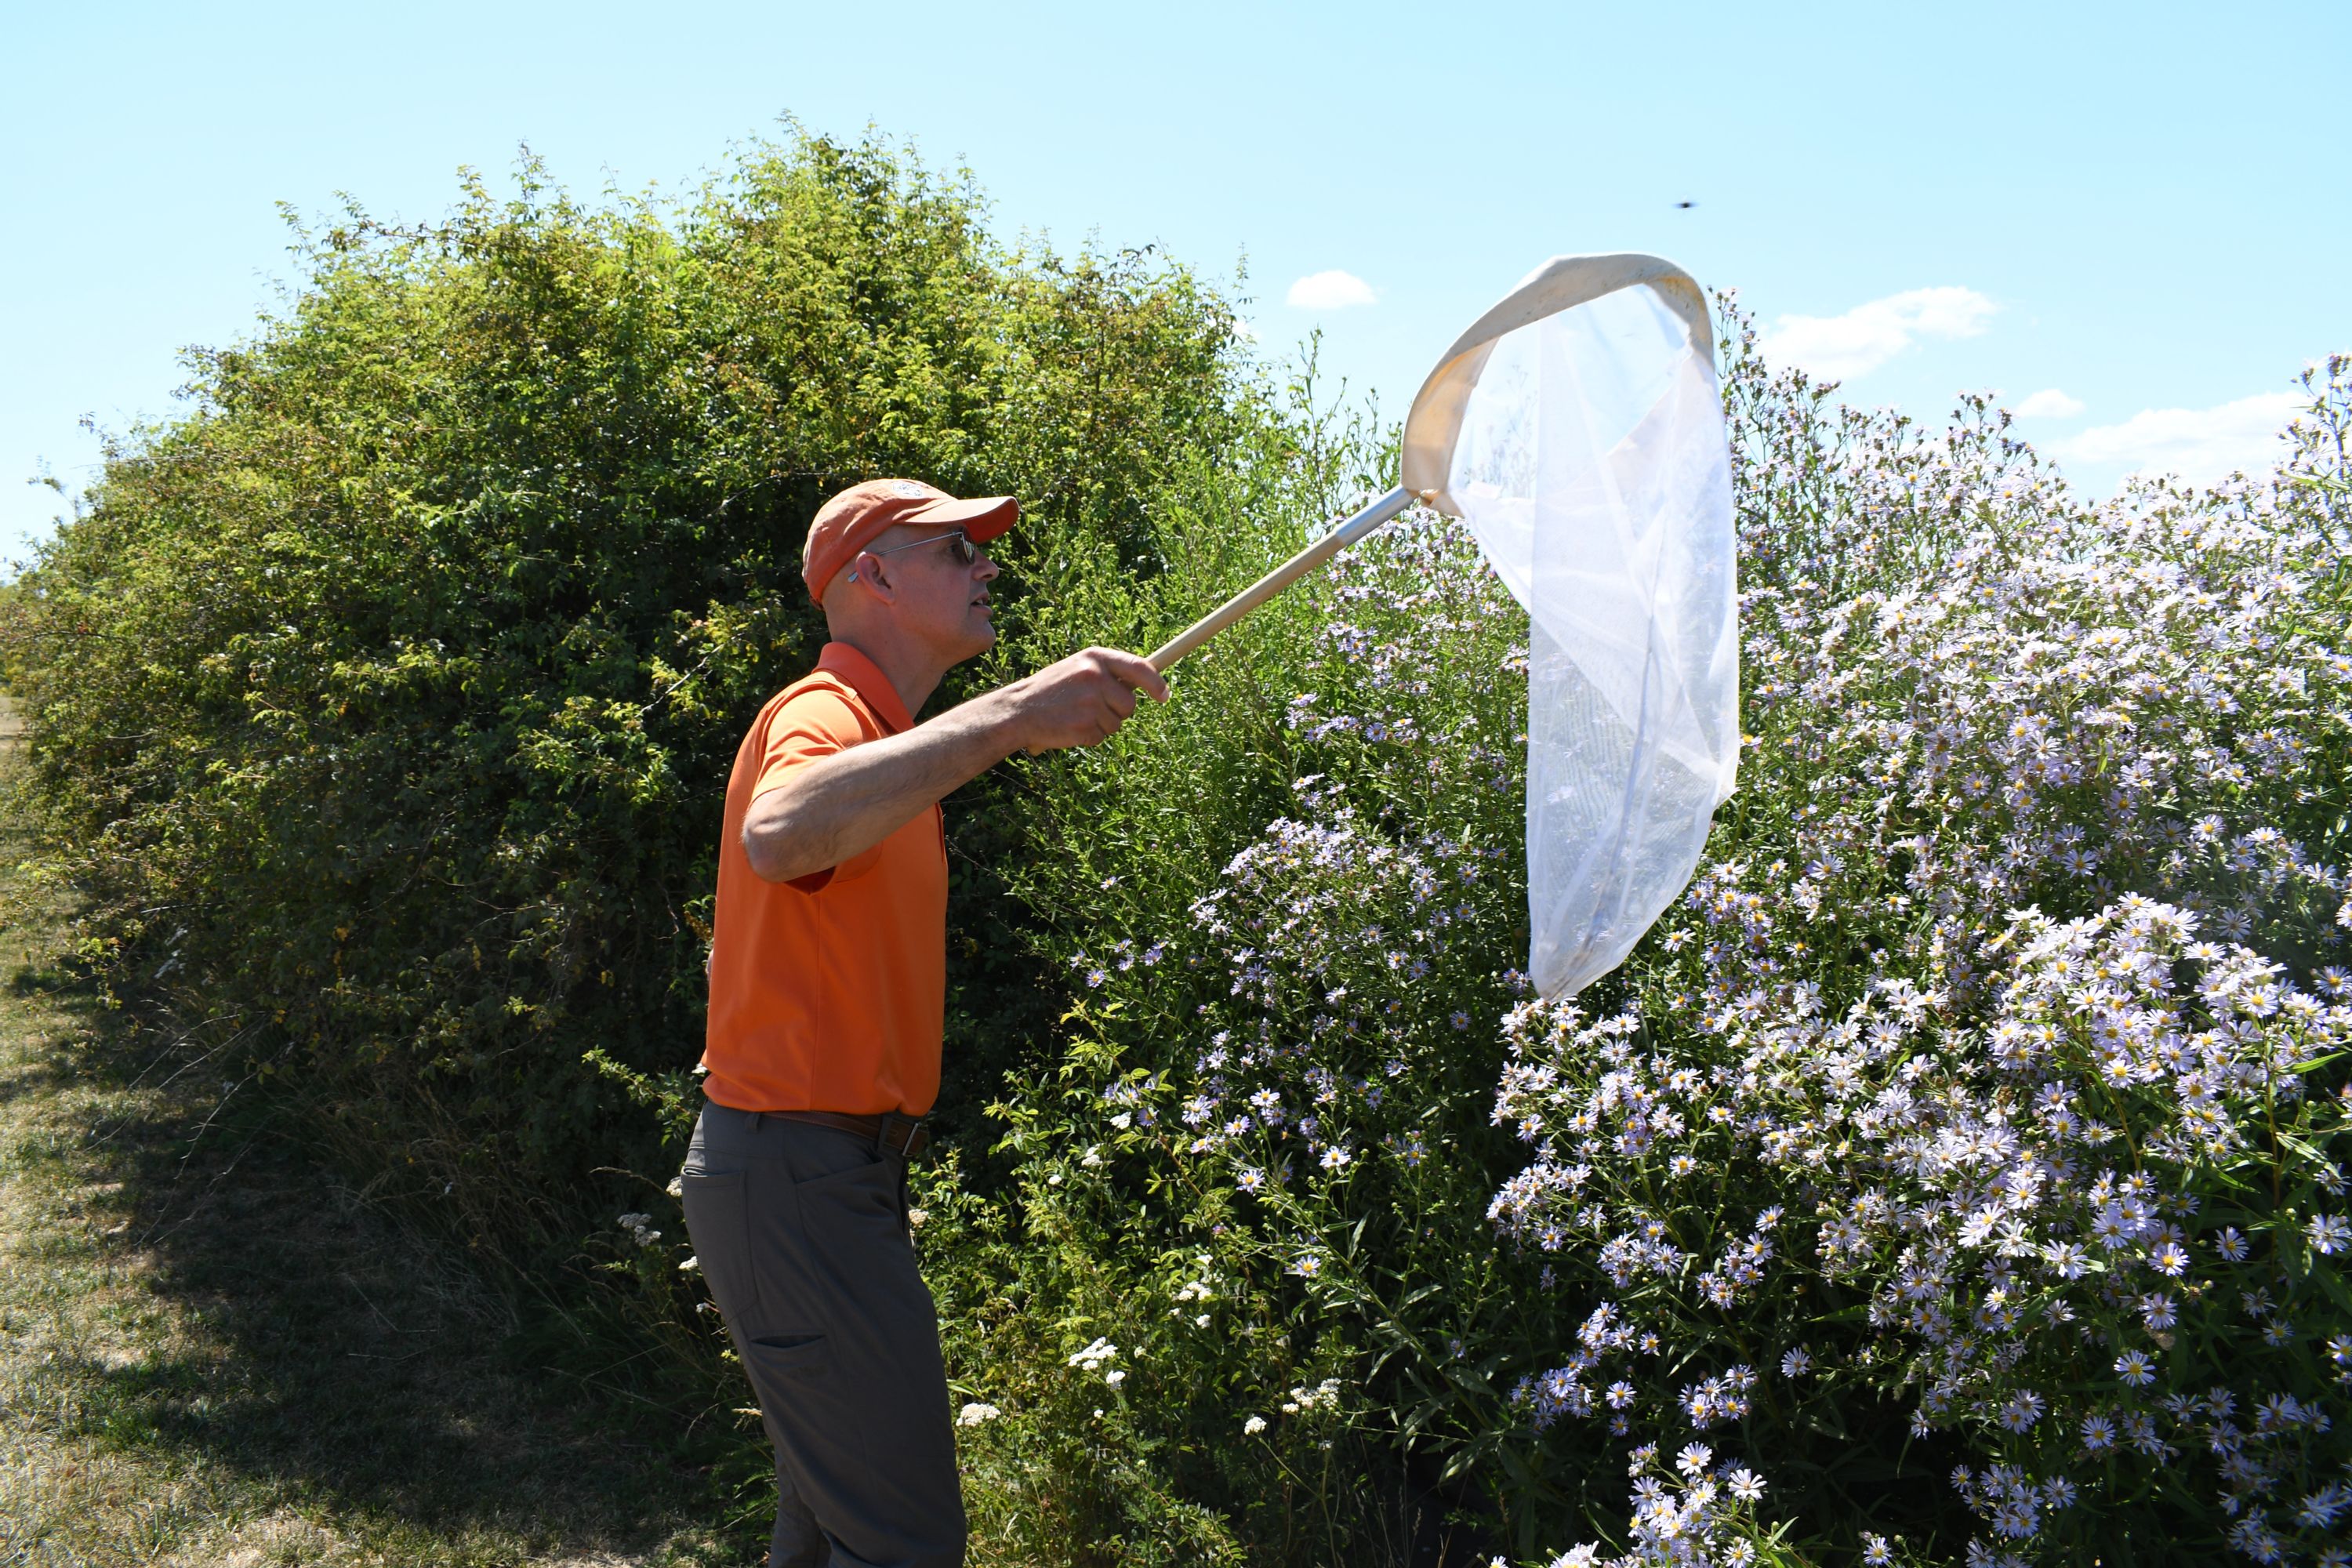 Andony Melathopoulos catches bees